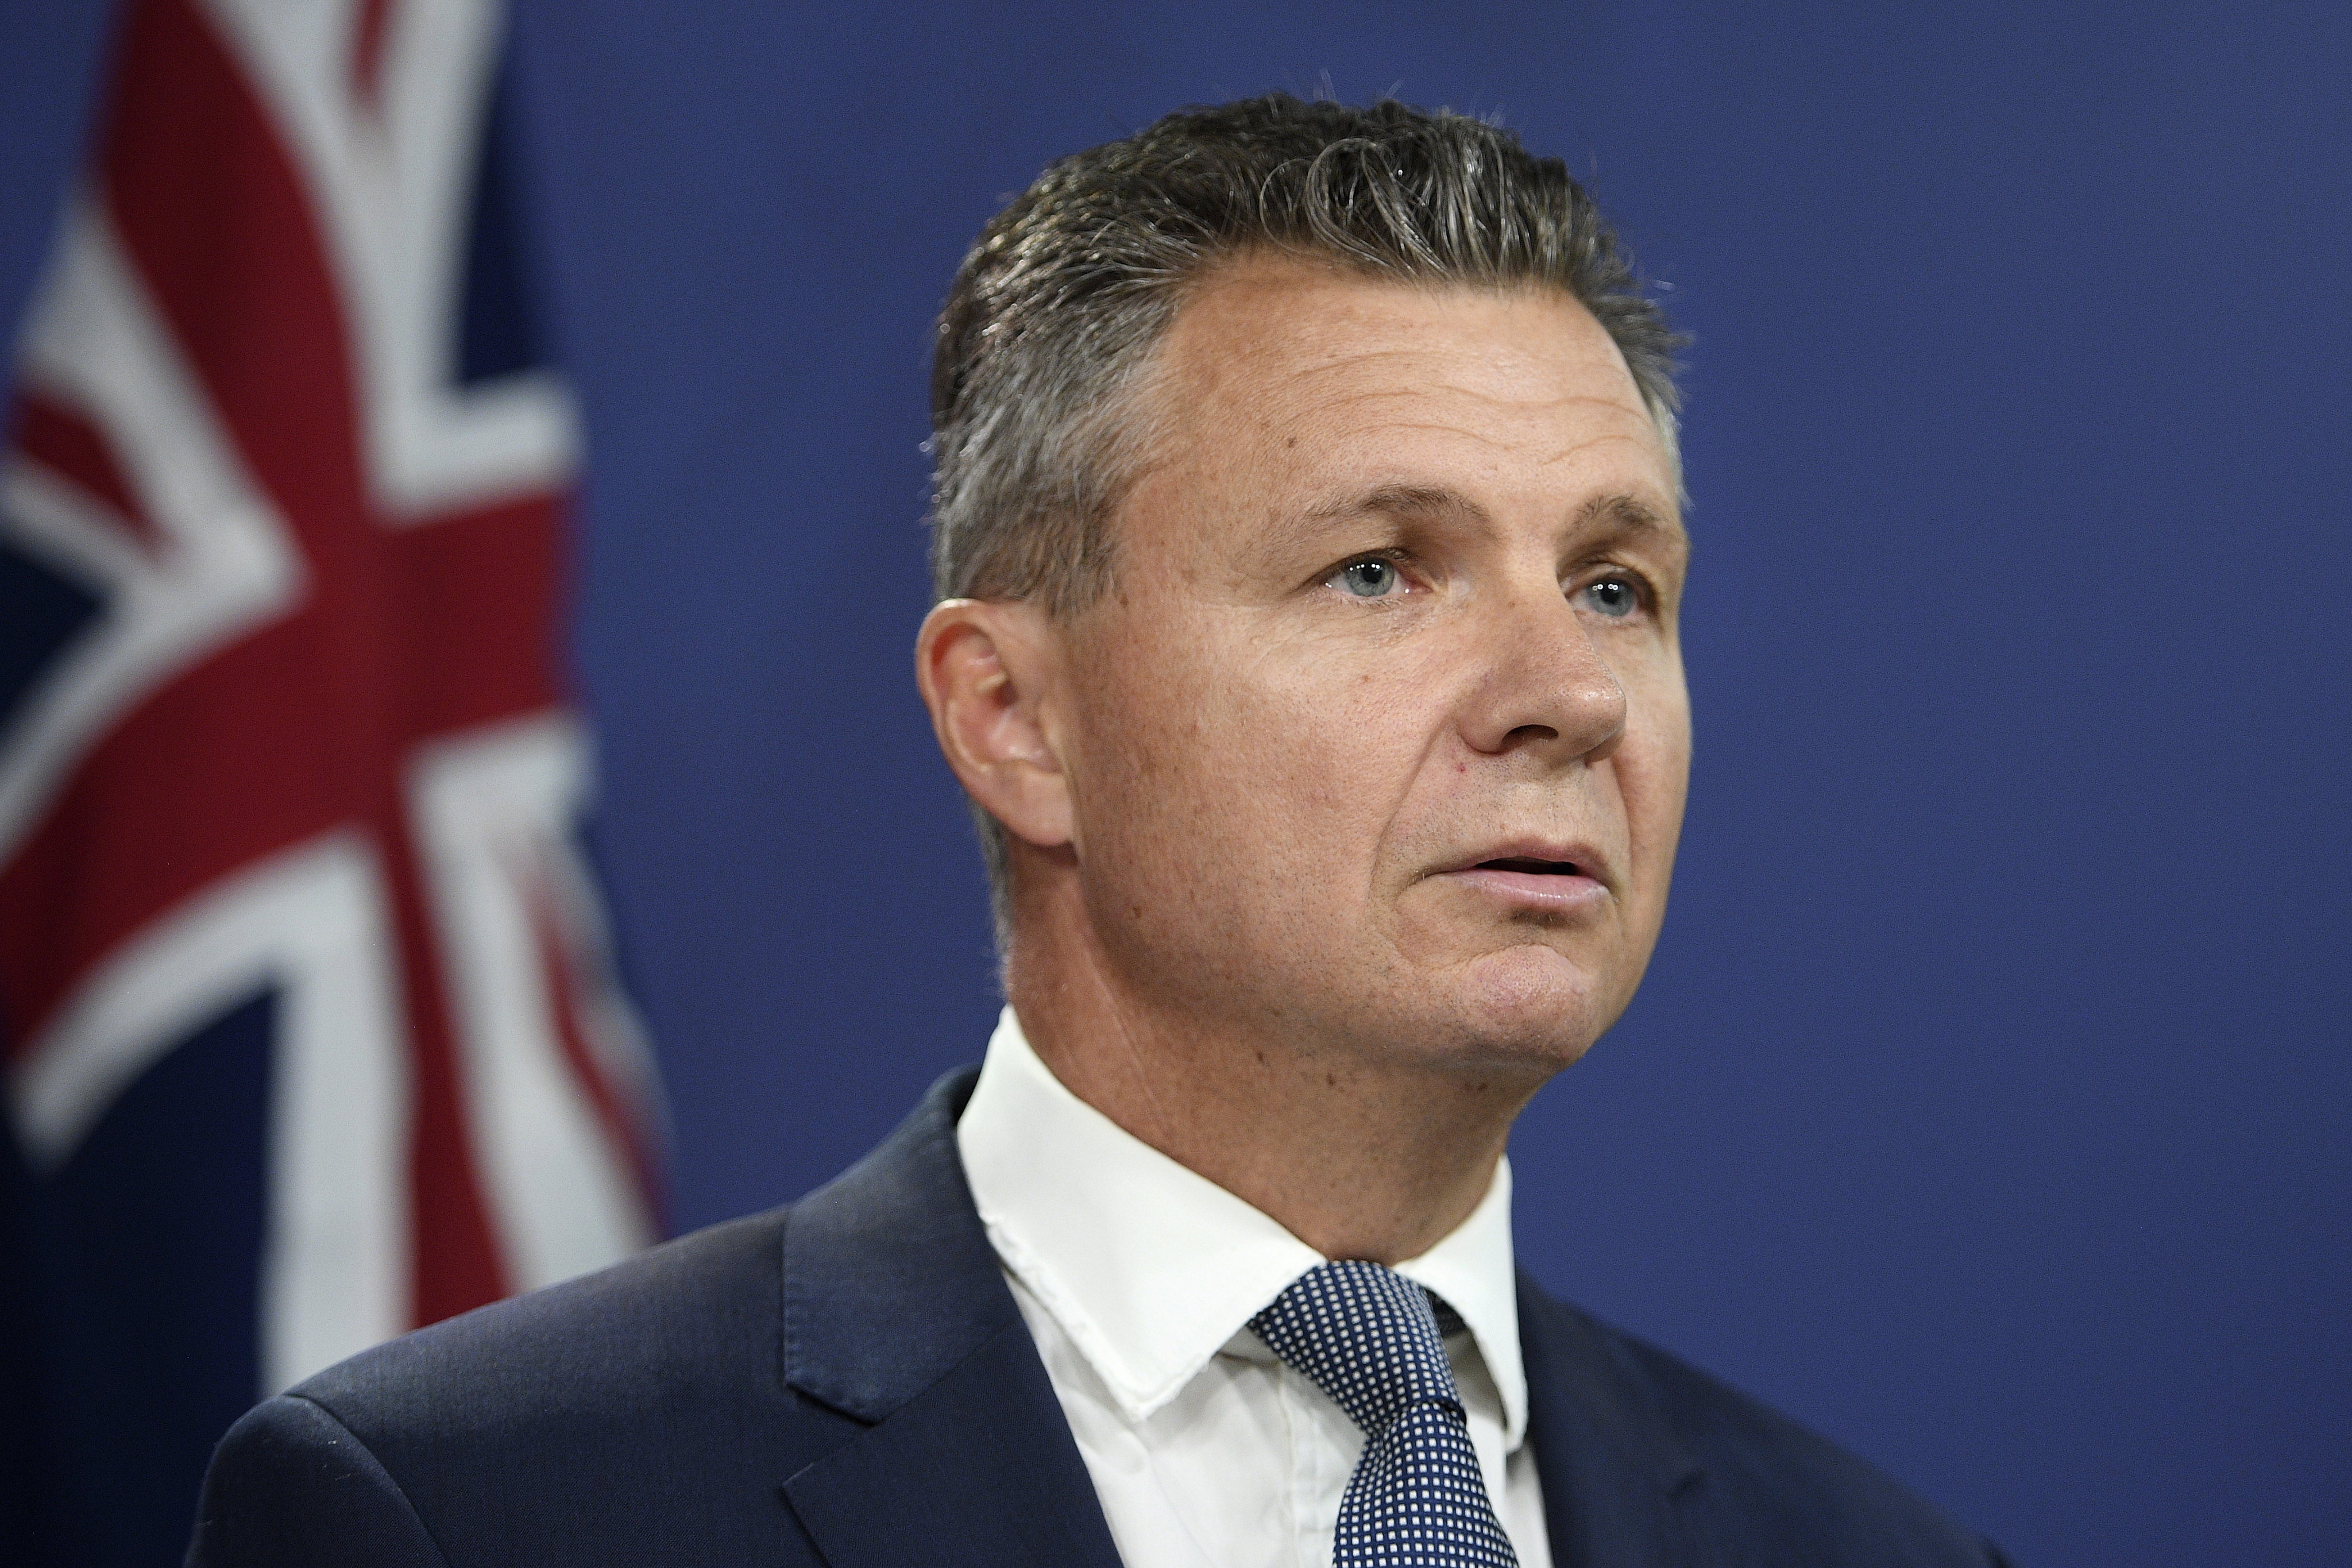  Assistant Minister for the Republic Matt Thistlethwaite said a failed referendum on Indigenous rights had set back the government’s plans to cut Australia’s constitutional ties to Britain. Photo: AP